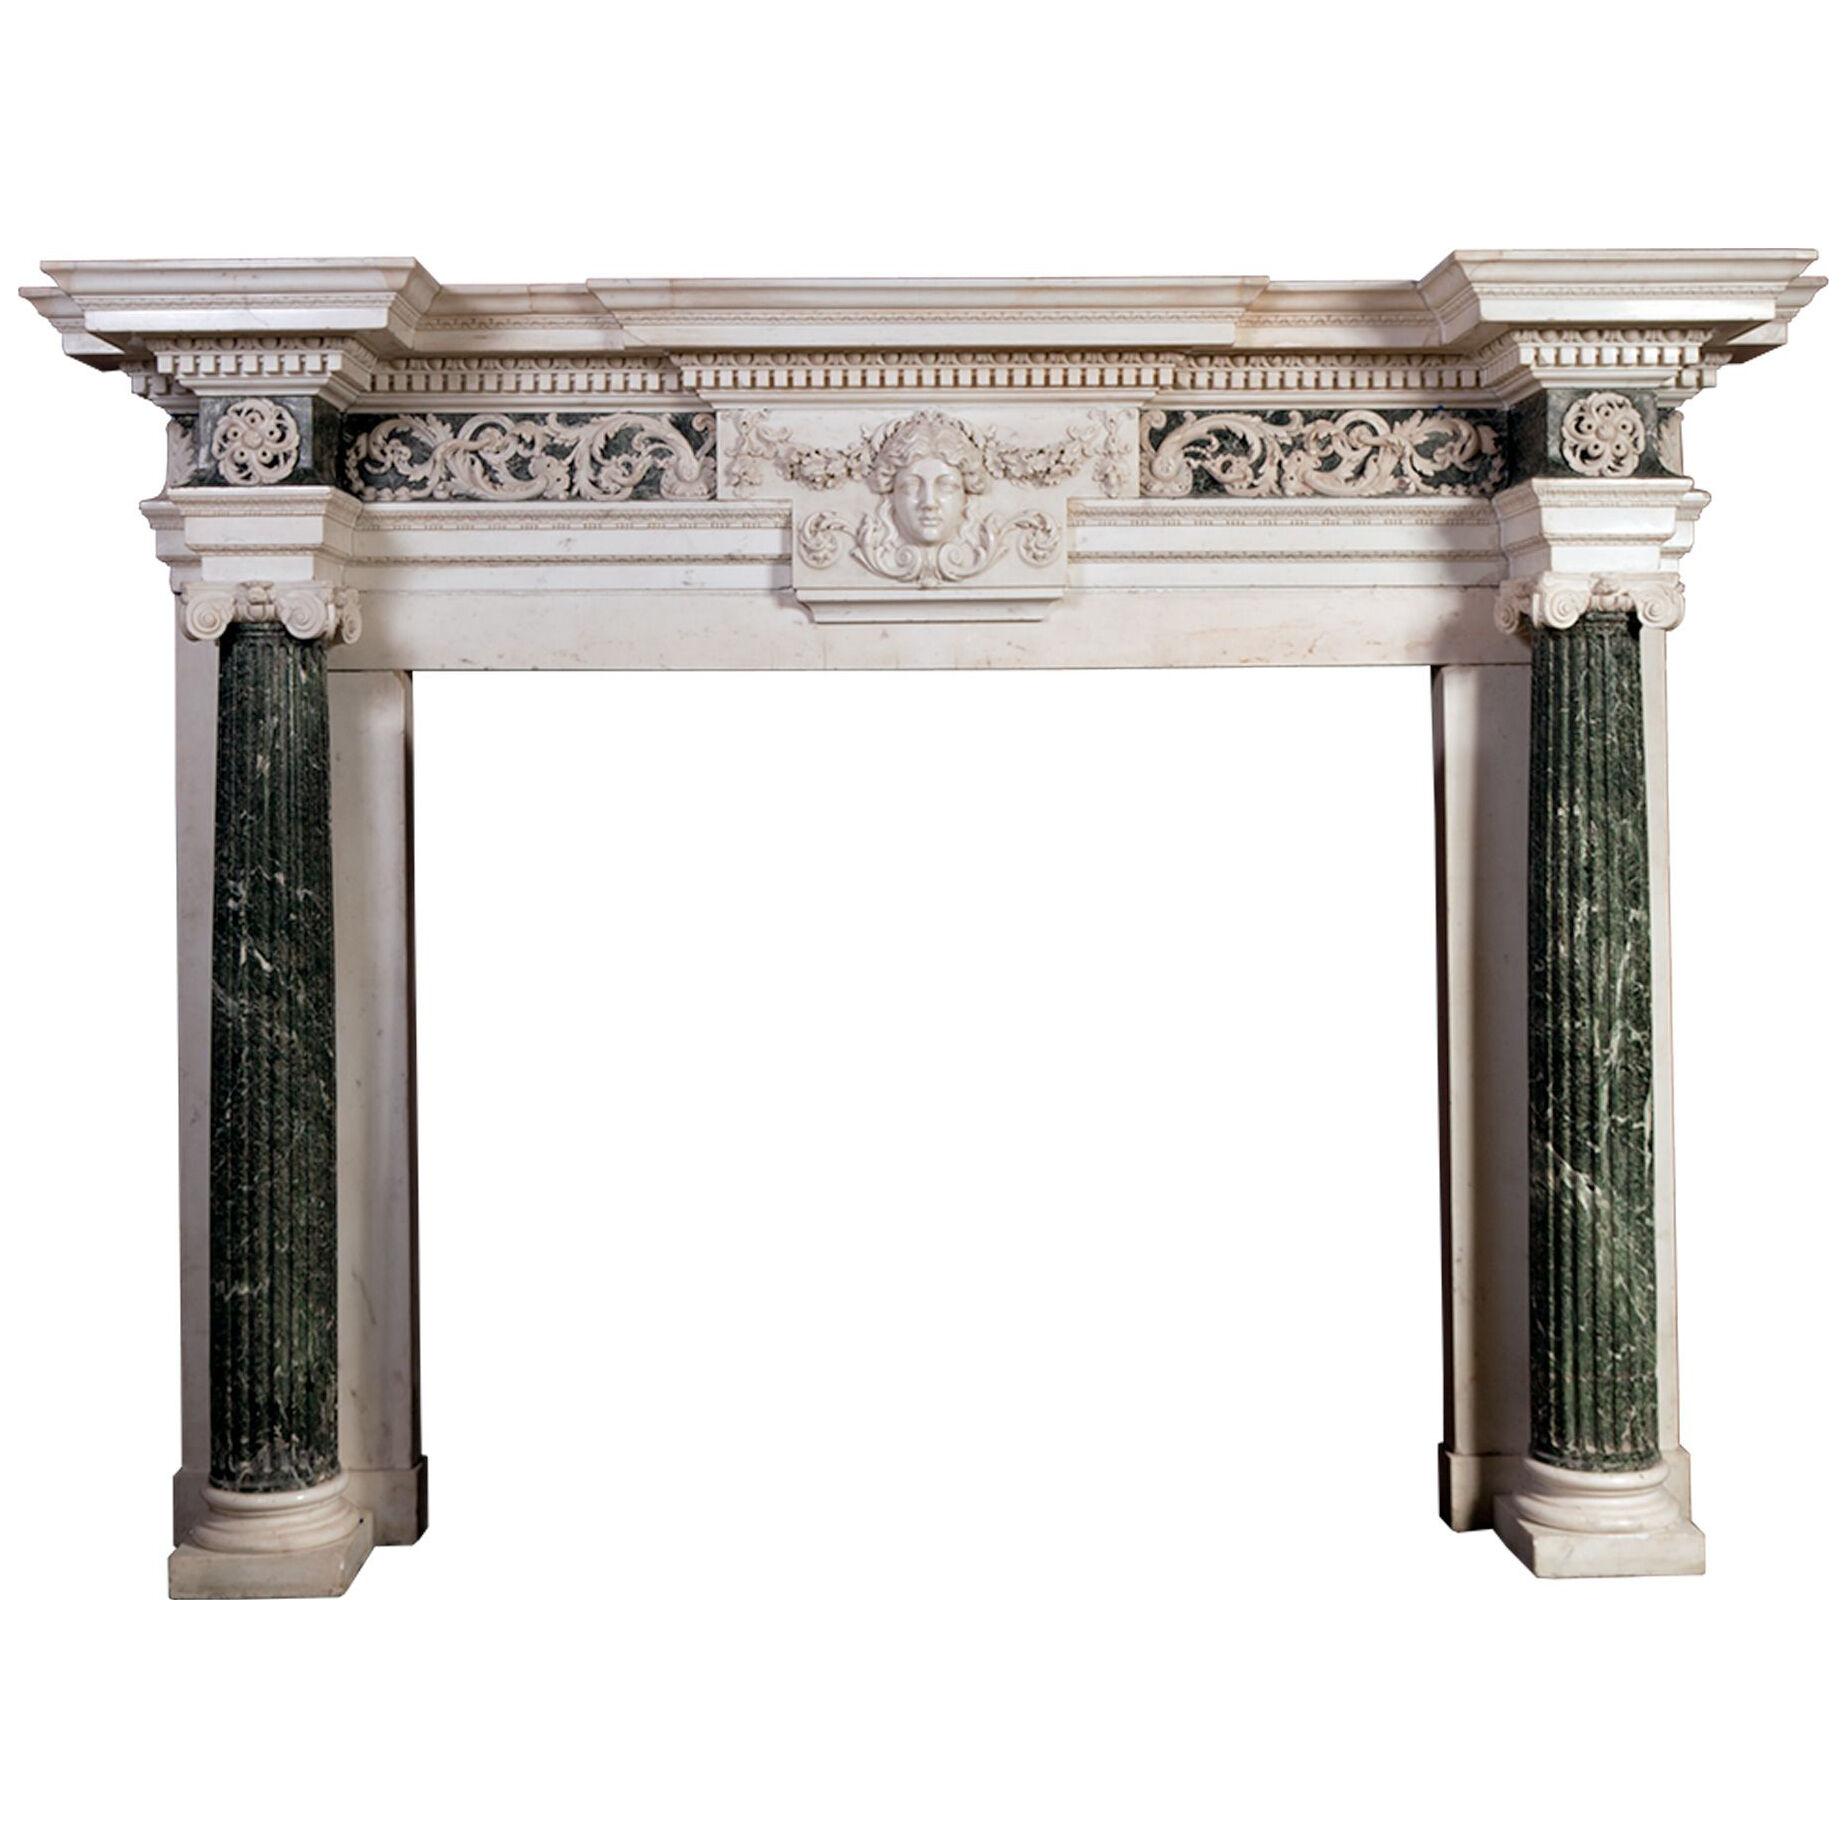 18th Century Marble Mantelpiece Designed by Isaac Ware